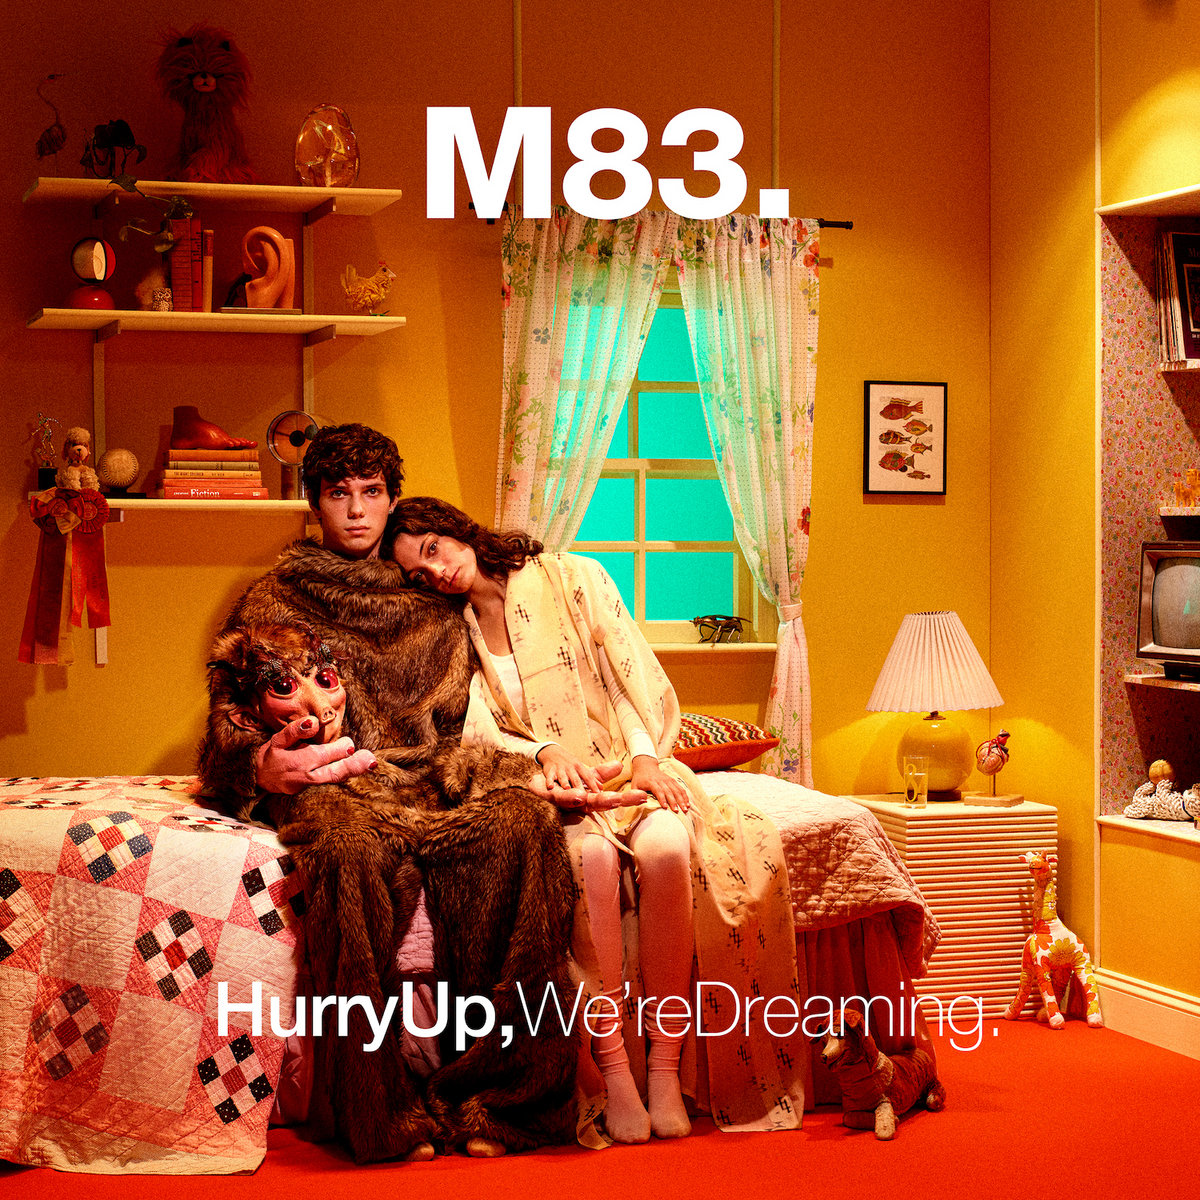 M83 - Hurry Up